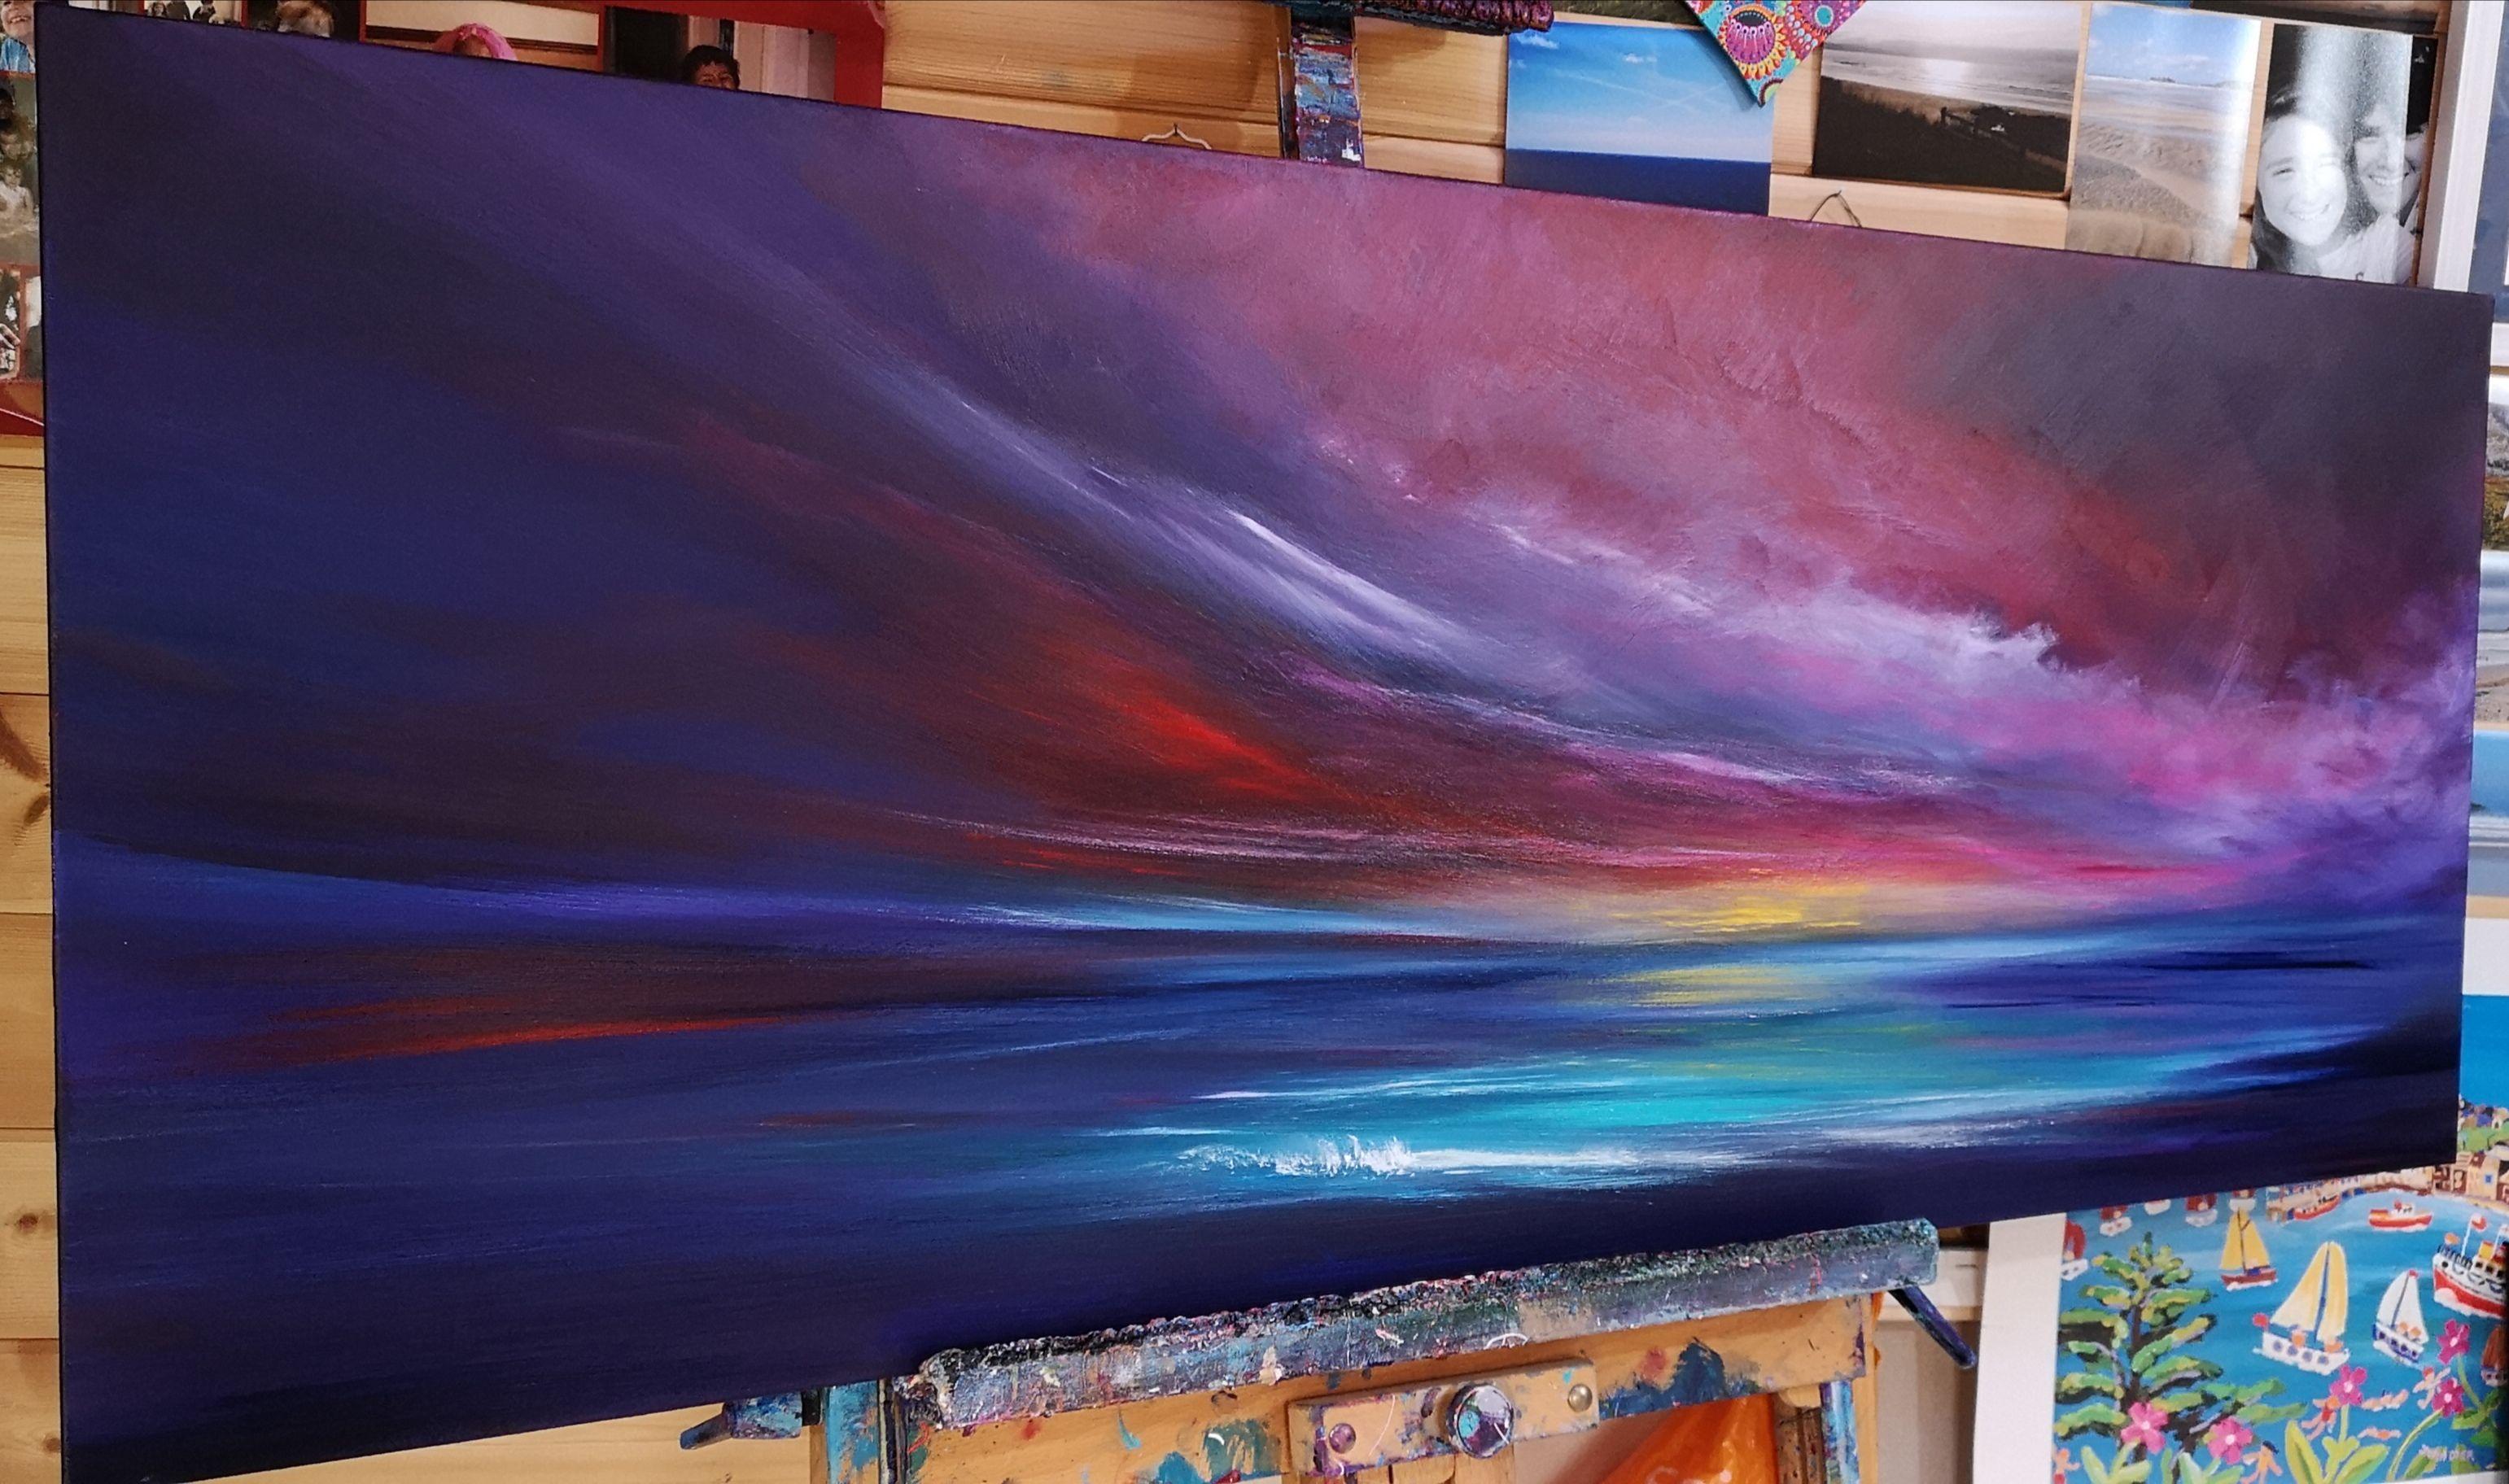 Incandescence, Panoramic Seascape, Painting, Acrylic on Canvas 2